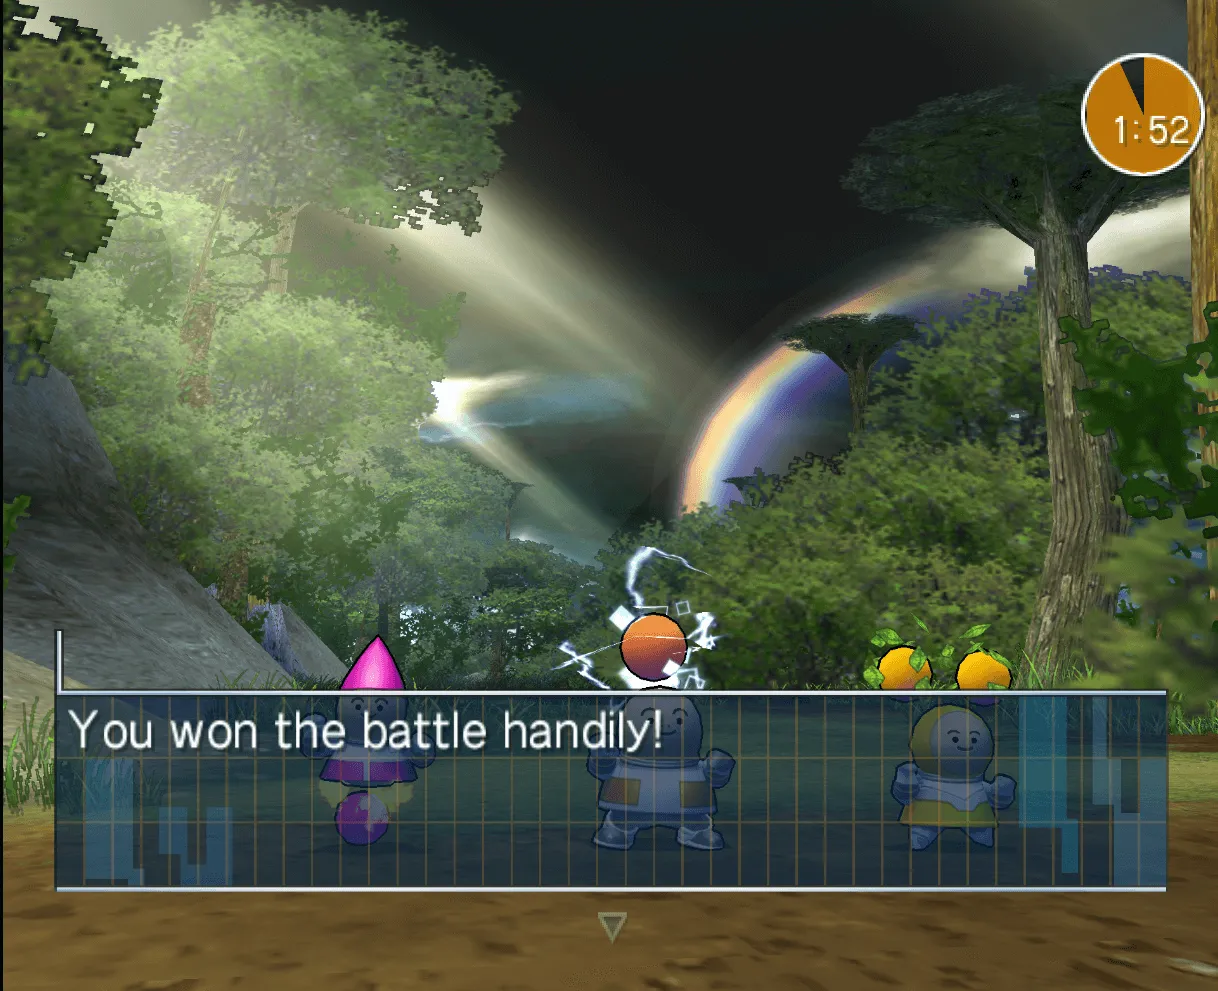 Battle end screen. There  is a rainbow in the background.